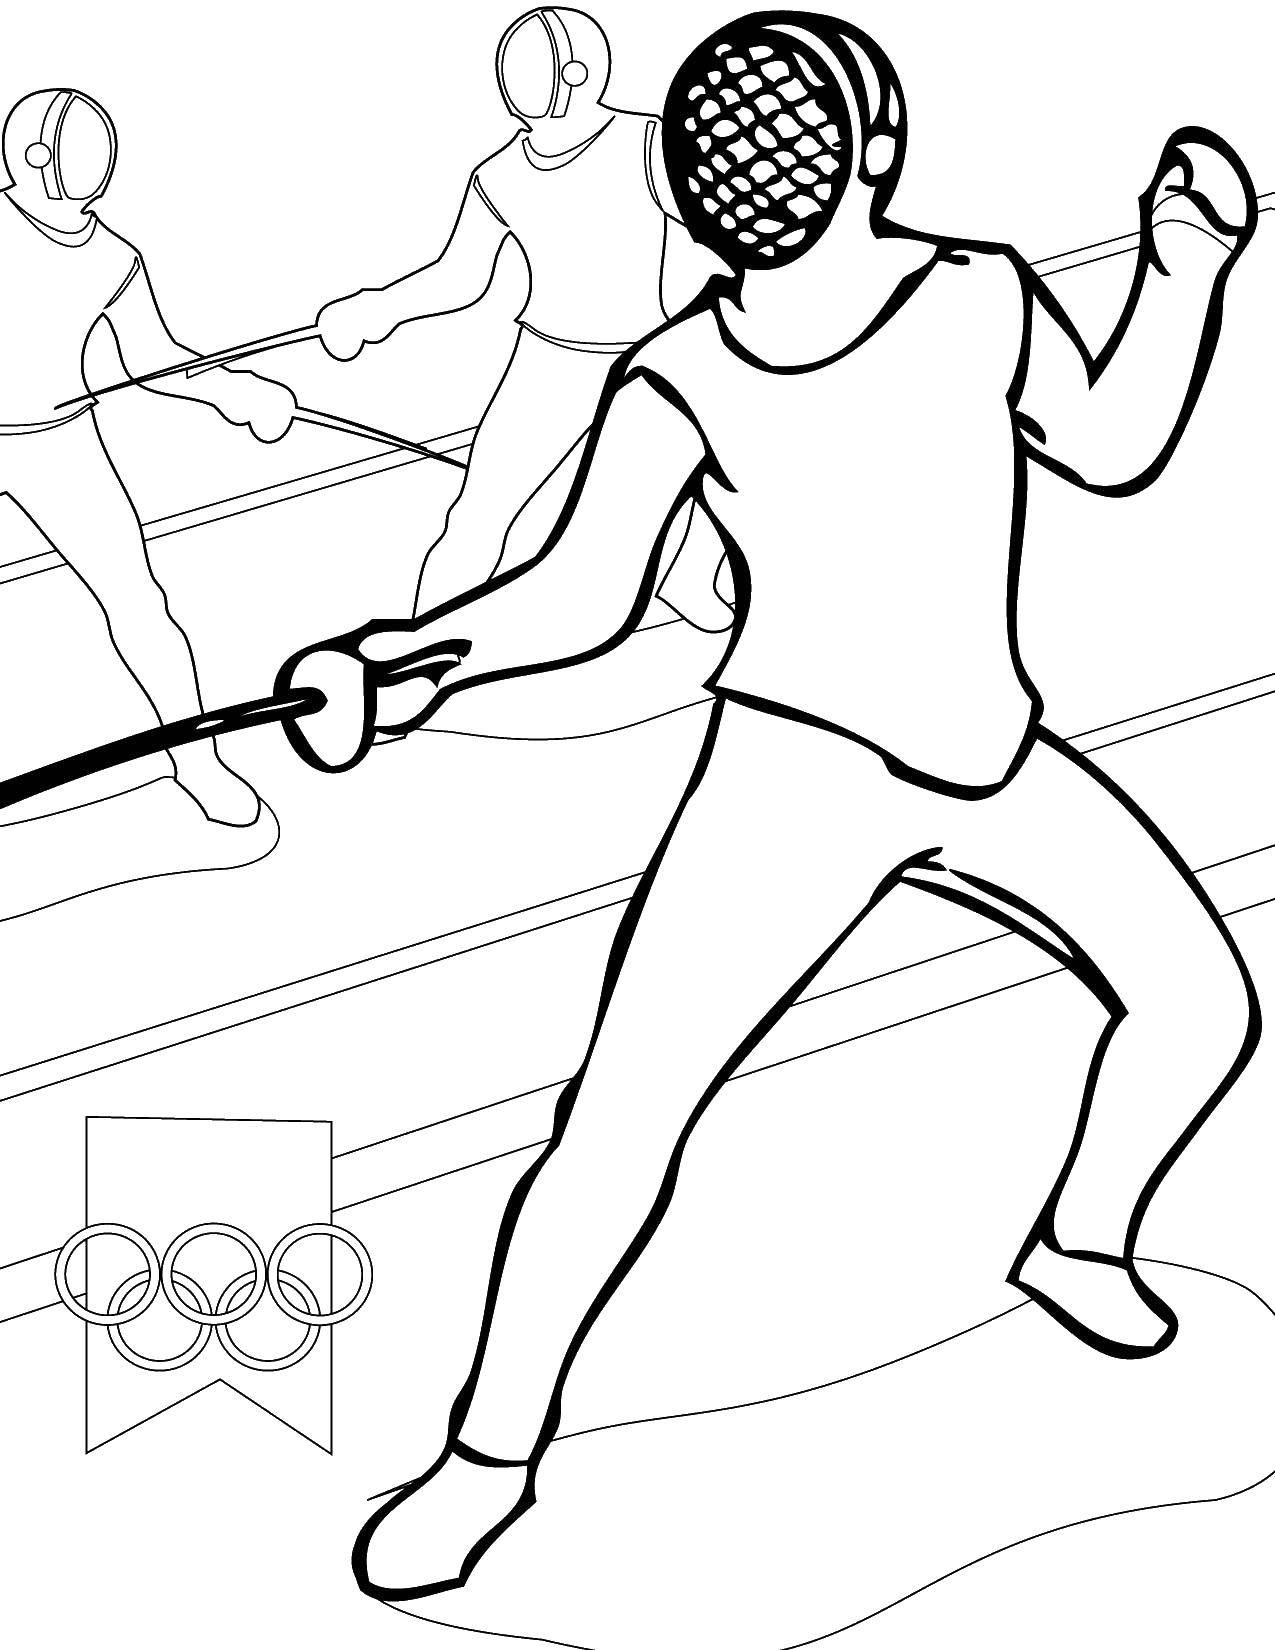 Coloring Fencing. Category Sports. Tags:  sports, fencing.